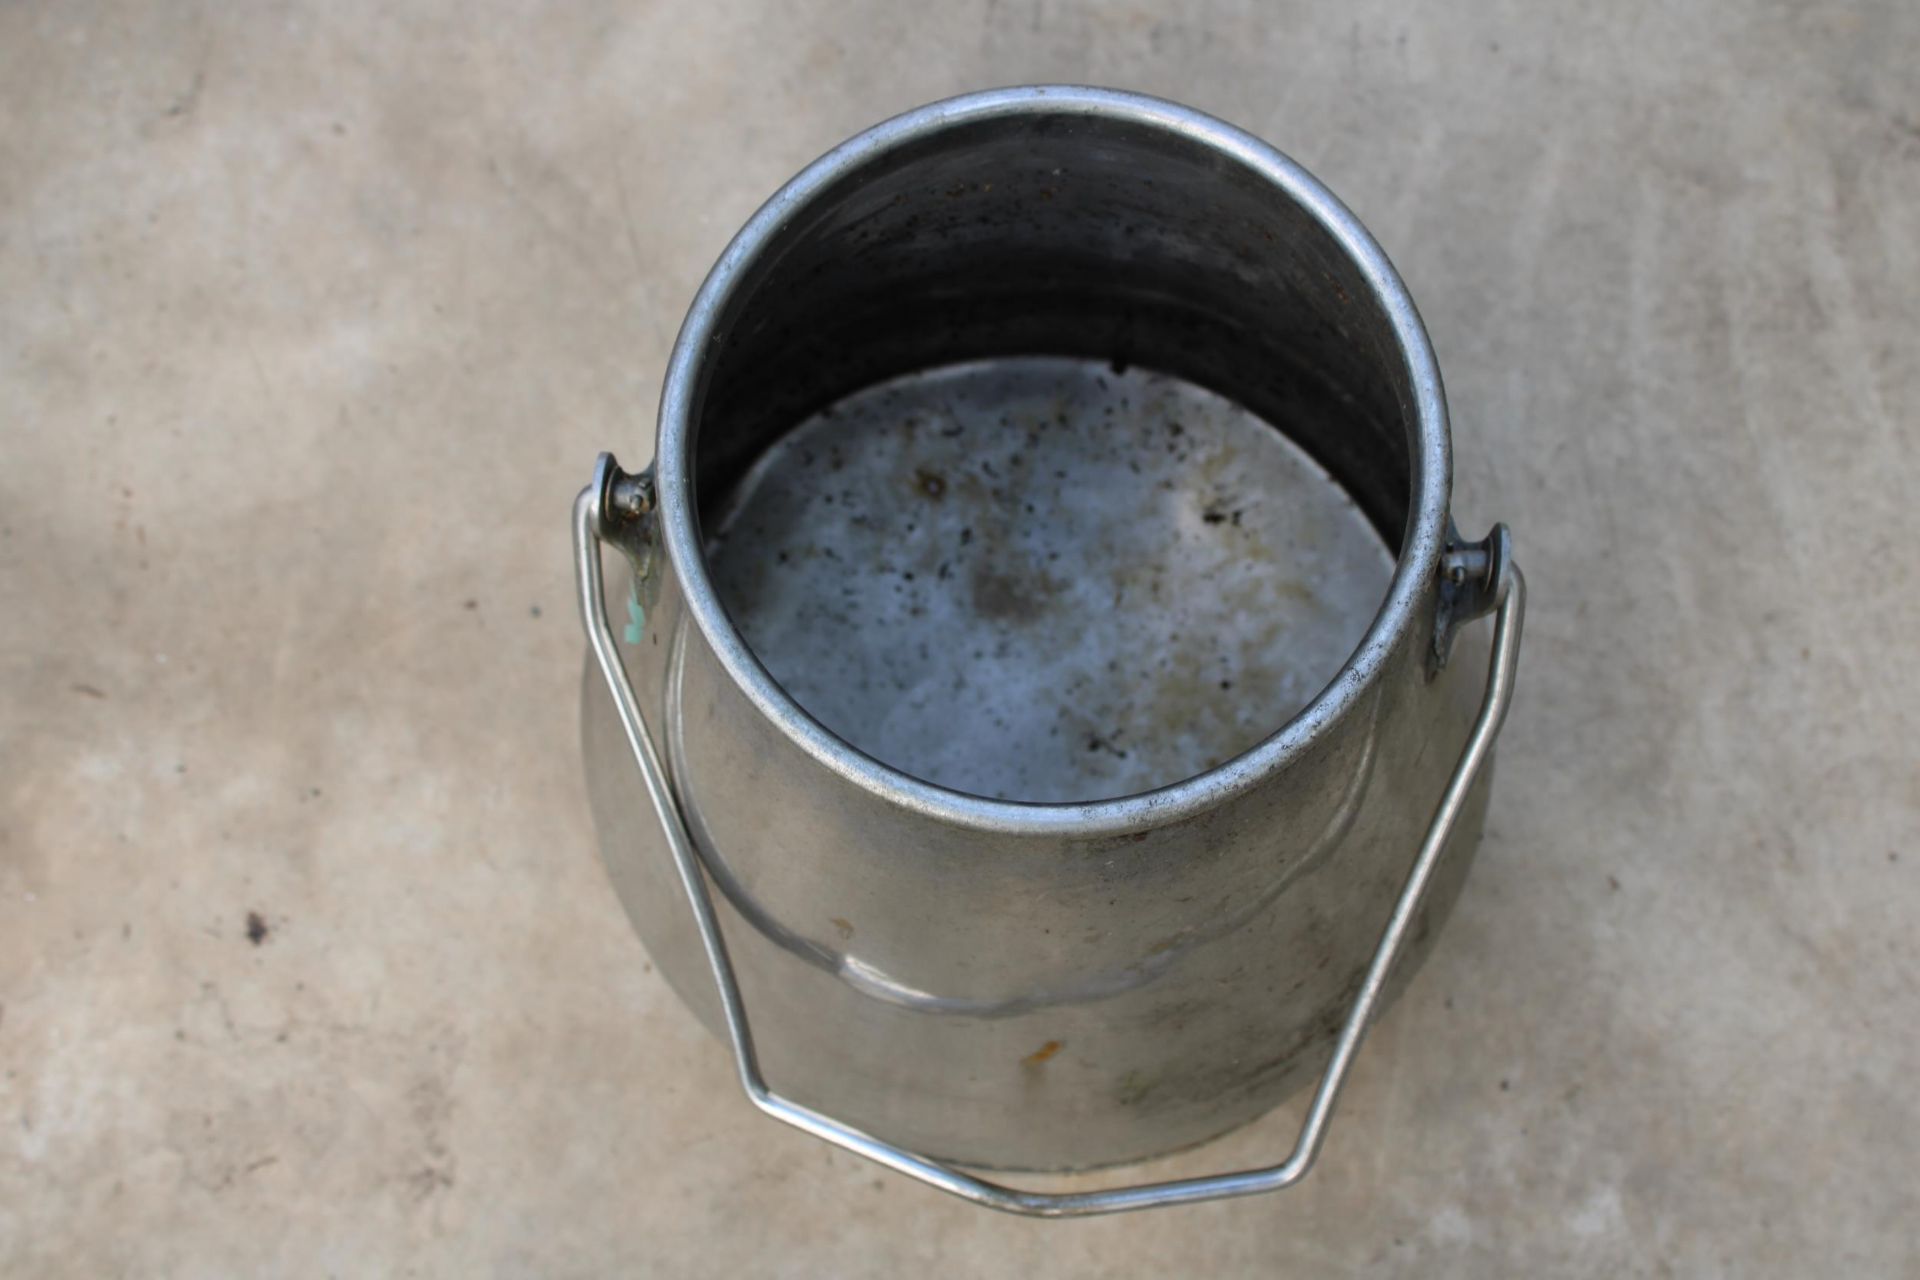 A HAND PAINTED STAINLESS STEEL MILKING BUCKET - Image 2 of 4